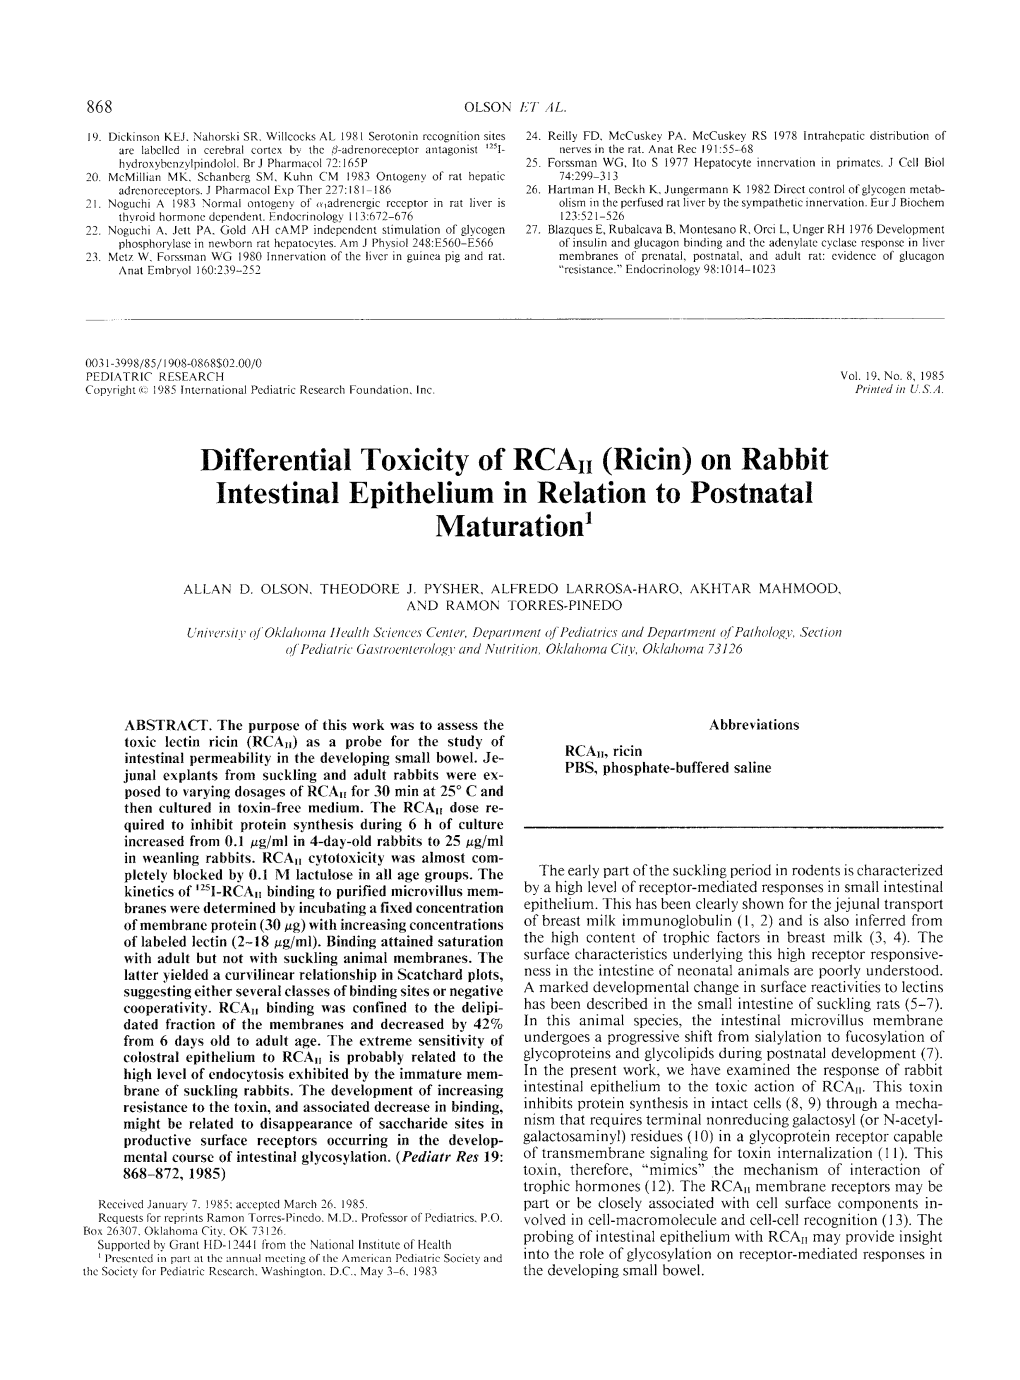 Differential Toxicity of Rcall (Ricin) on Rabbit Intestinal Epithelium in Relation to Postnatal Maturation'